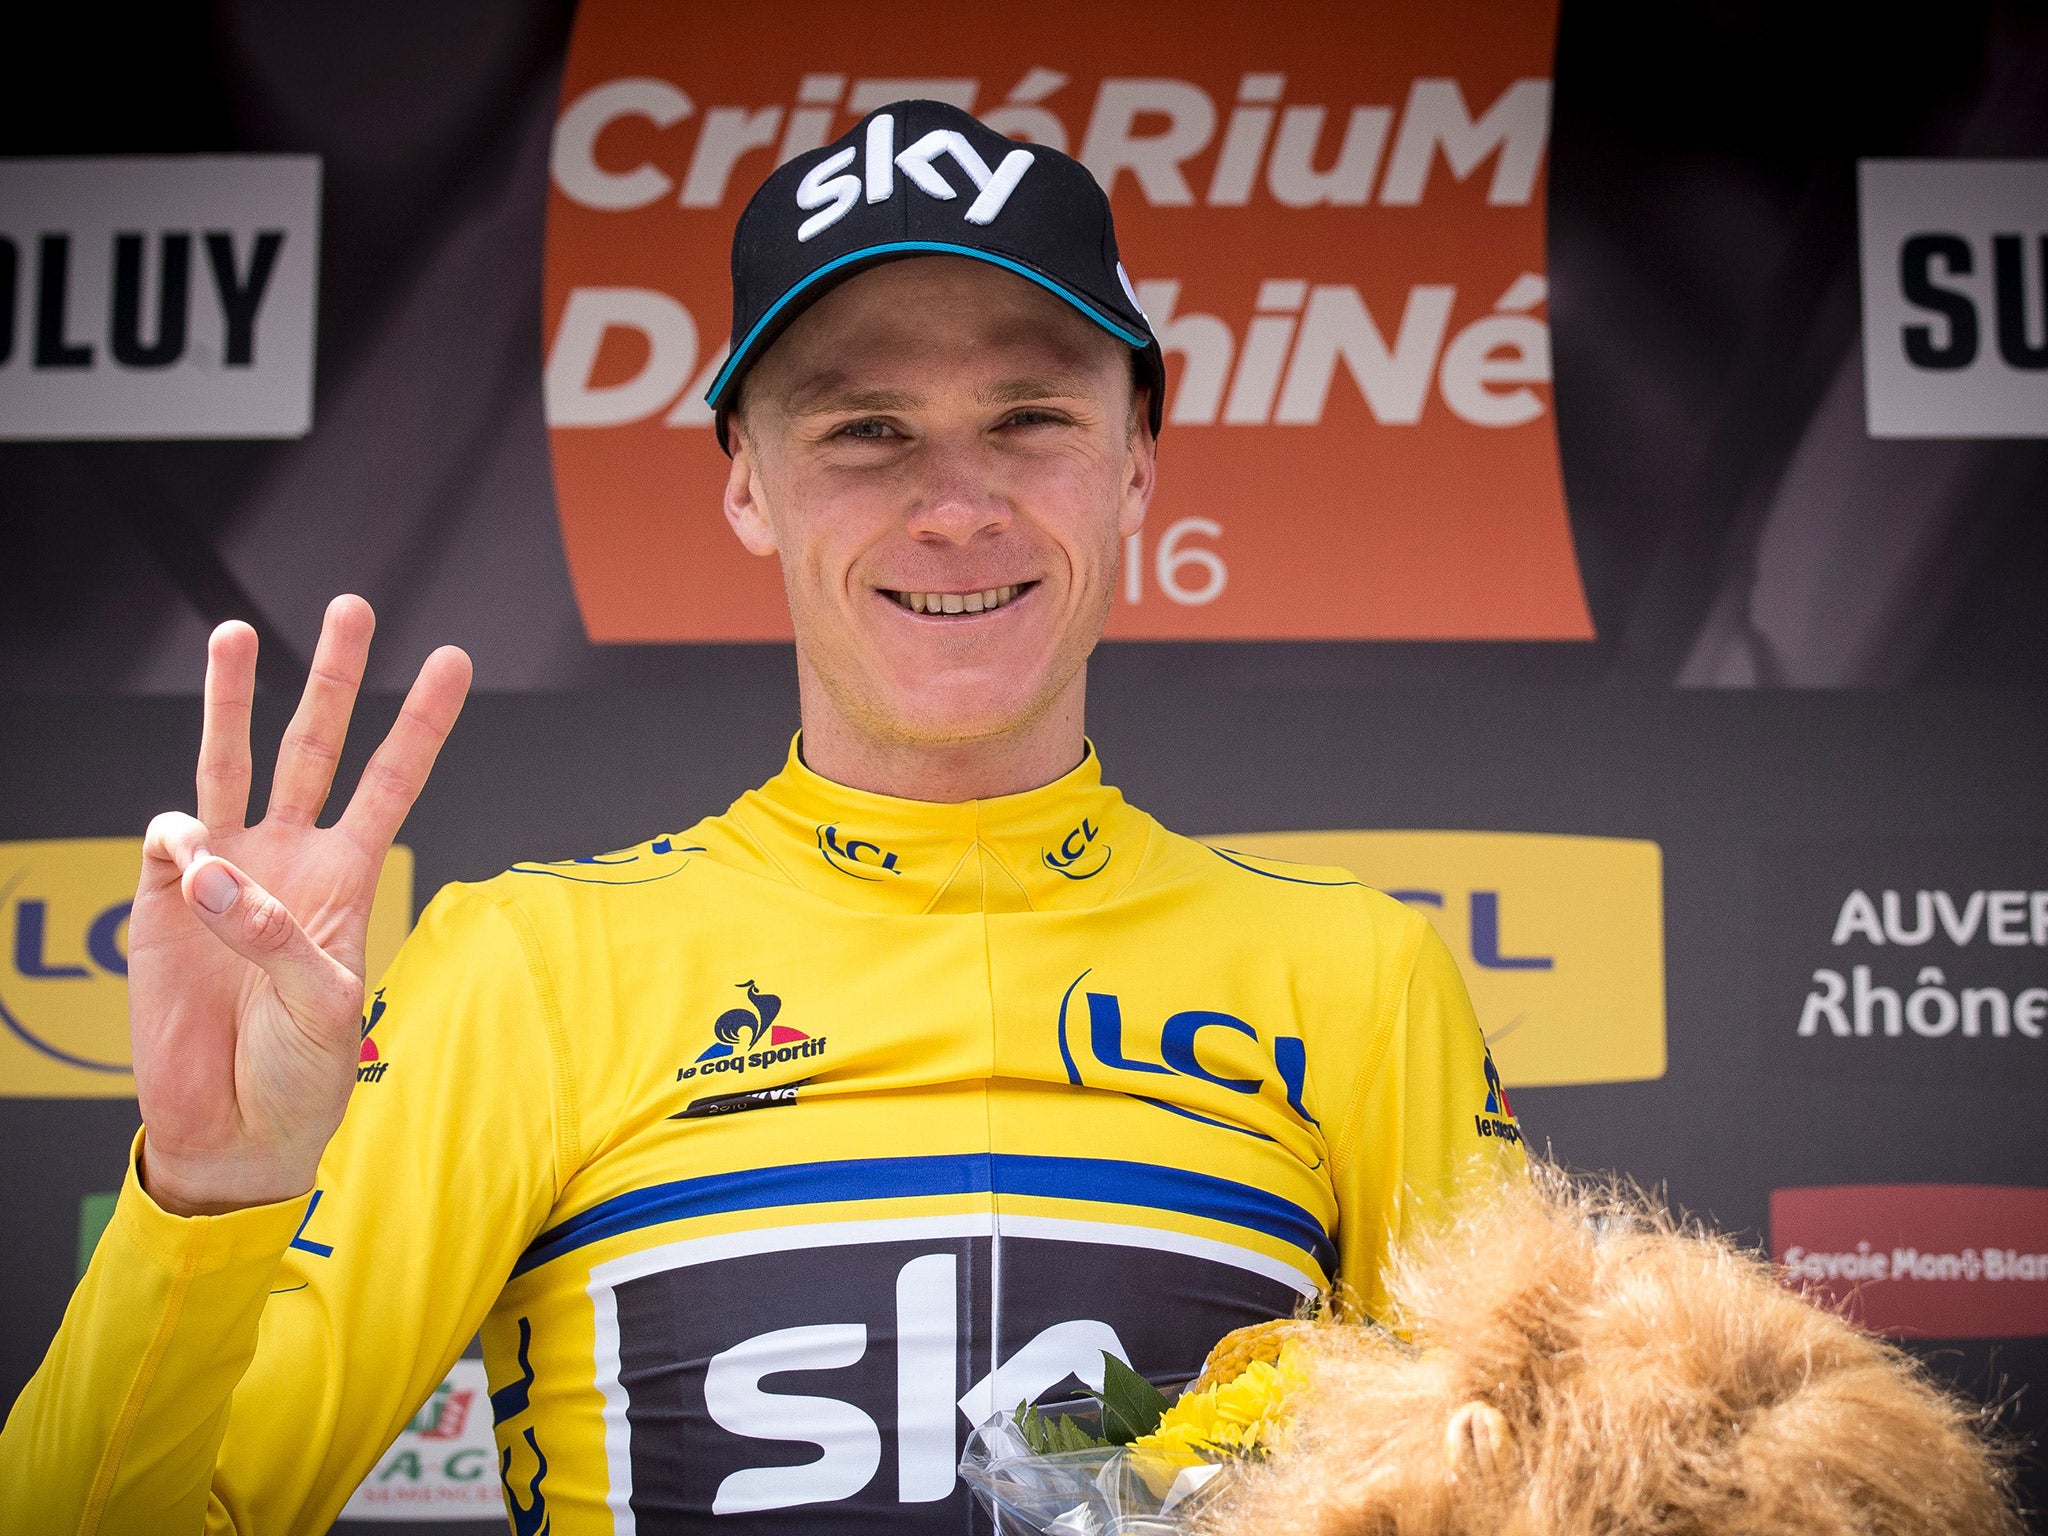 Chris Froome has the opportunity to win the Tour de France for a third time